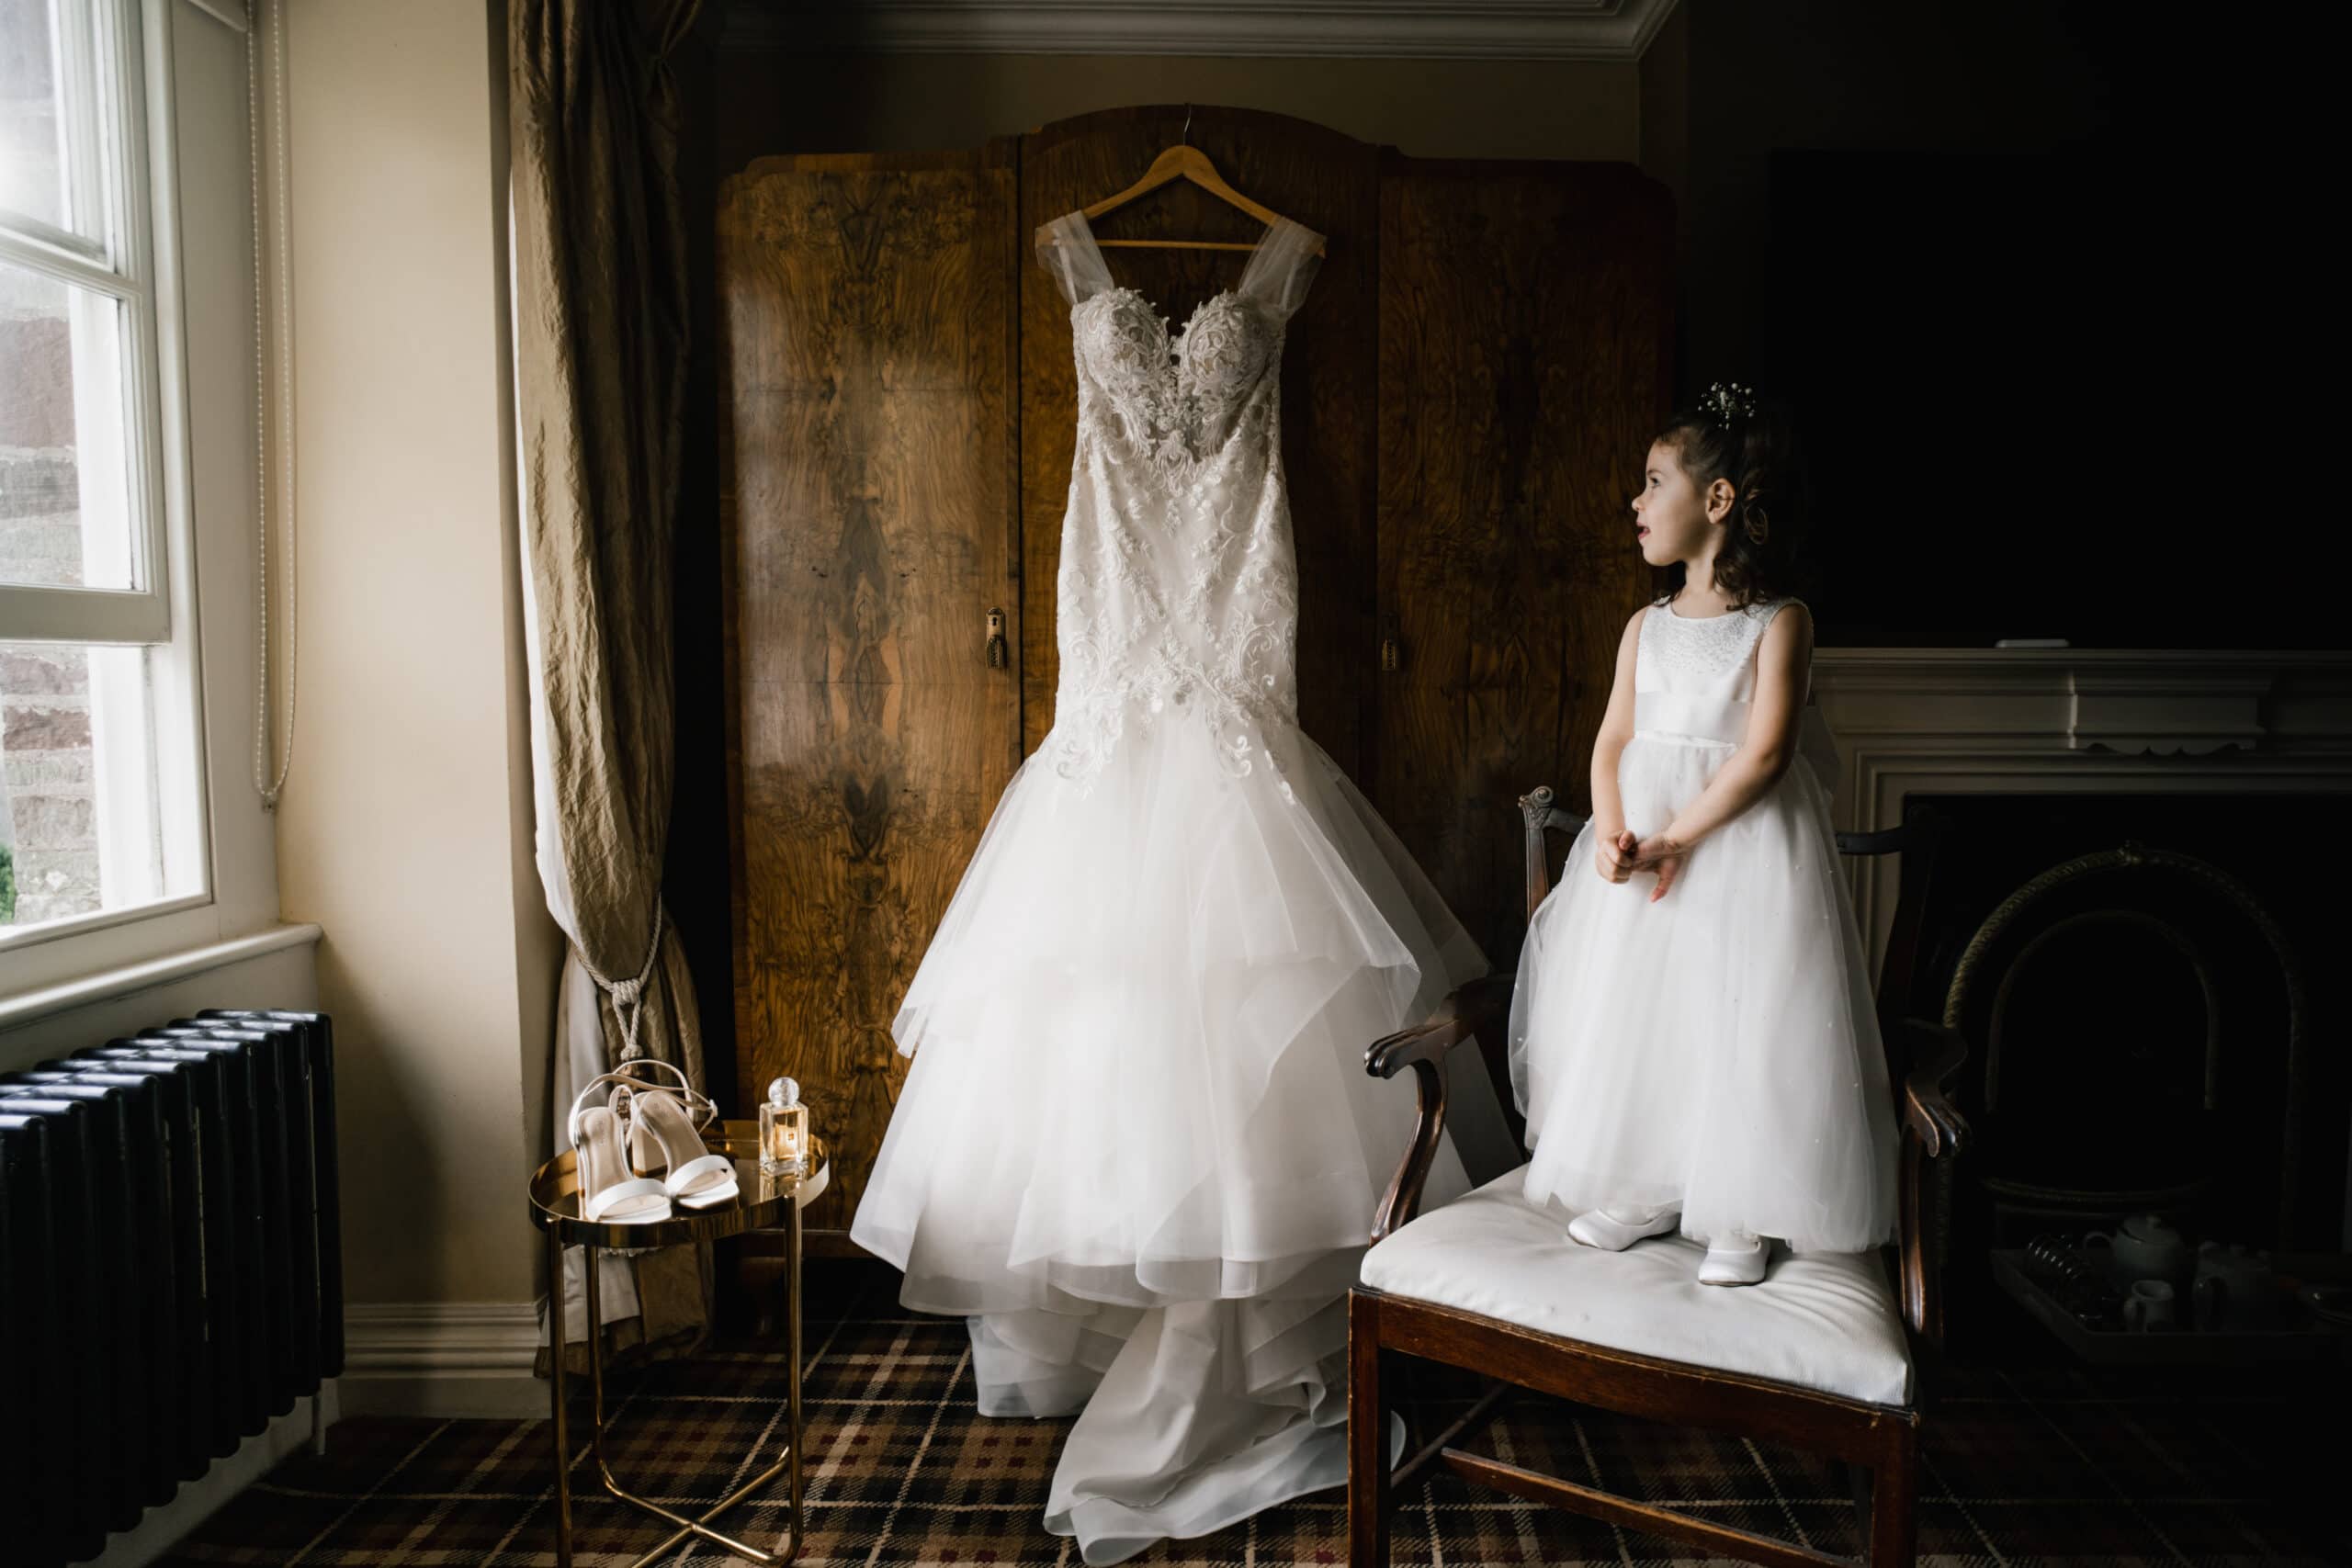 A young girl in a white dress gazes at an elegant wedding gown hanging on a wooden wardrobe in a vintage-styled room, natural light streaming through the window, capturing the essence of wedding photography style